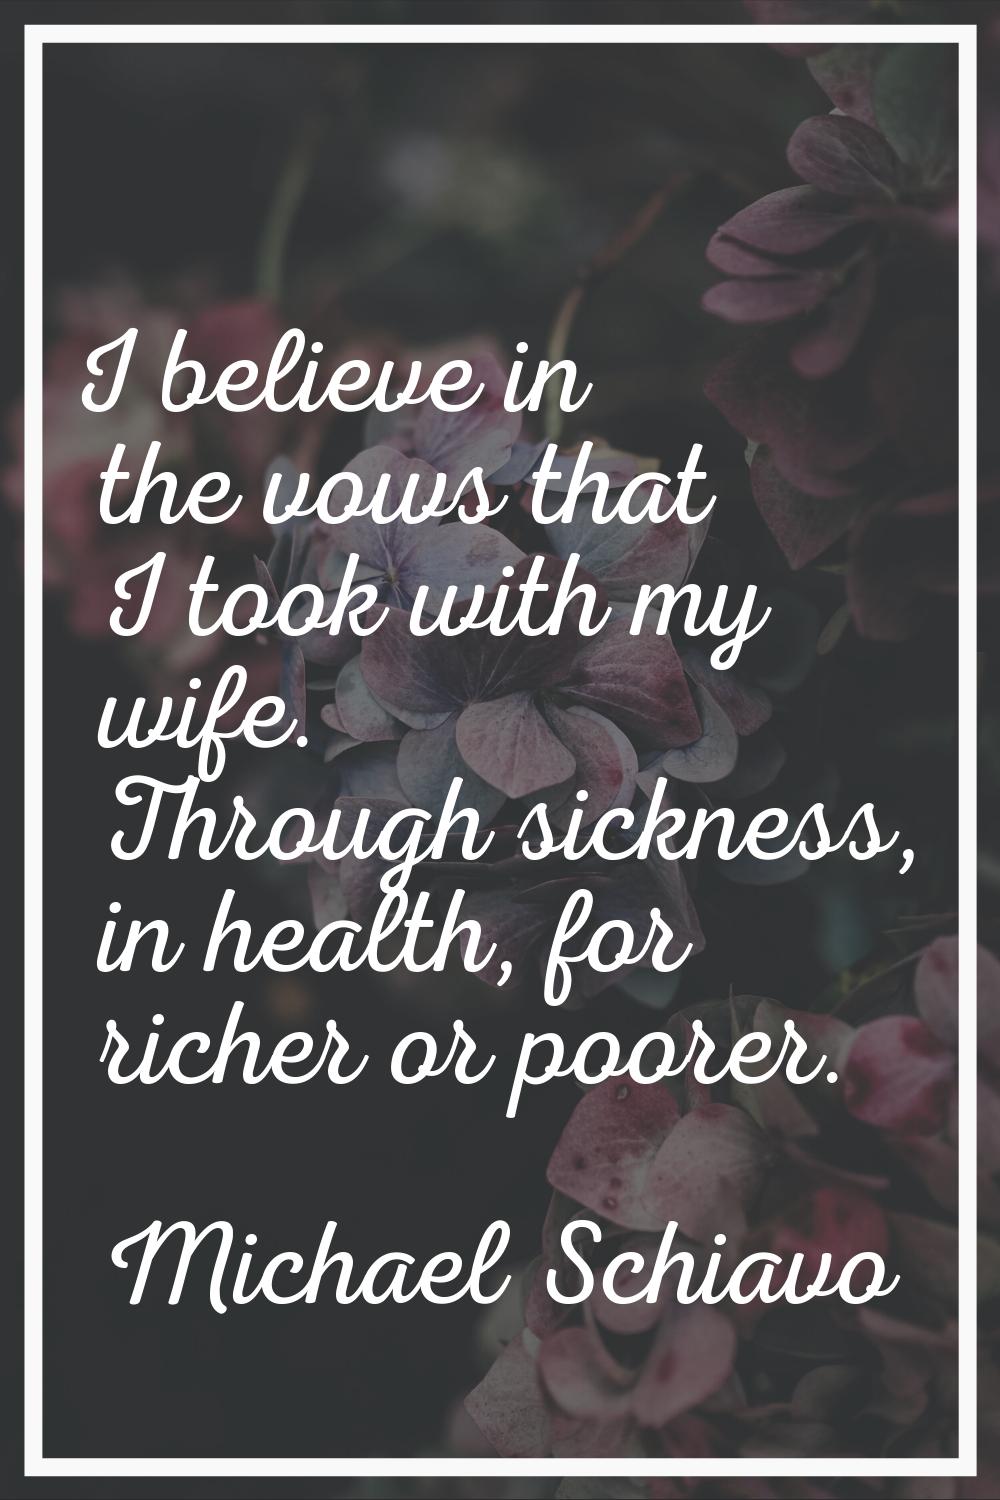 I believe in the vows that I took with my wife. Through sickness, in health, for richer or poorer.